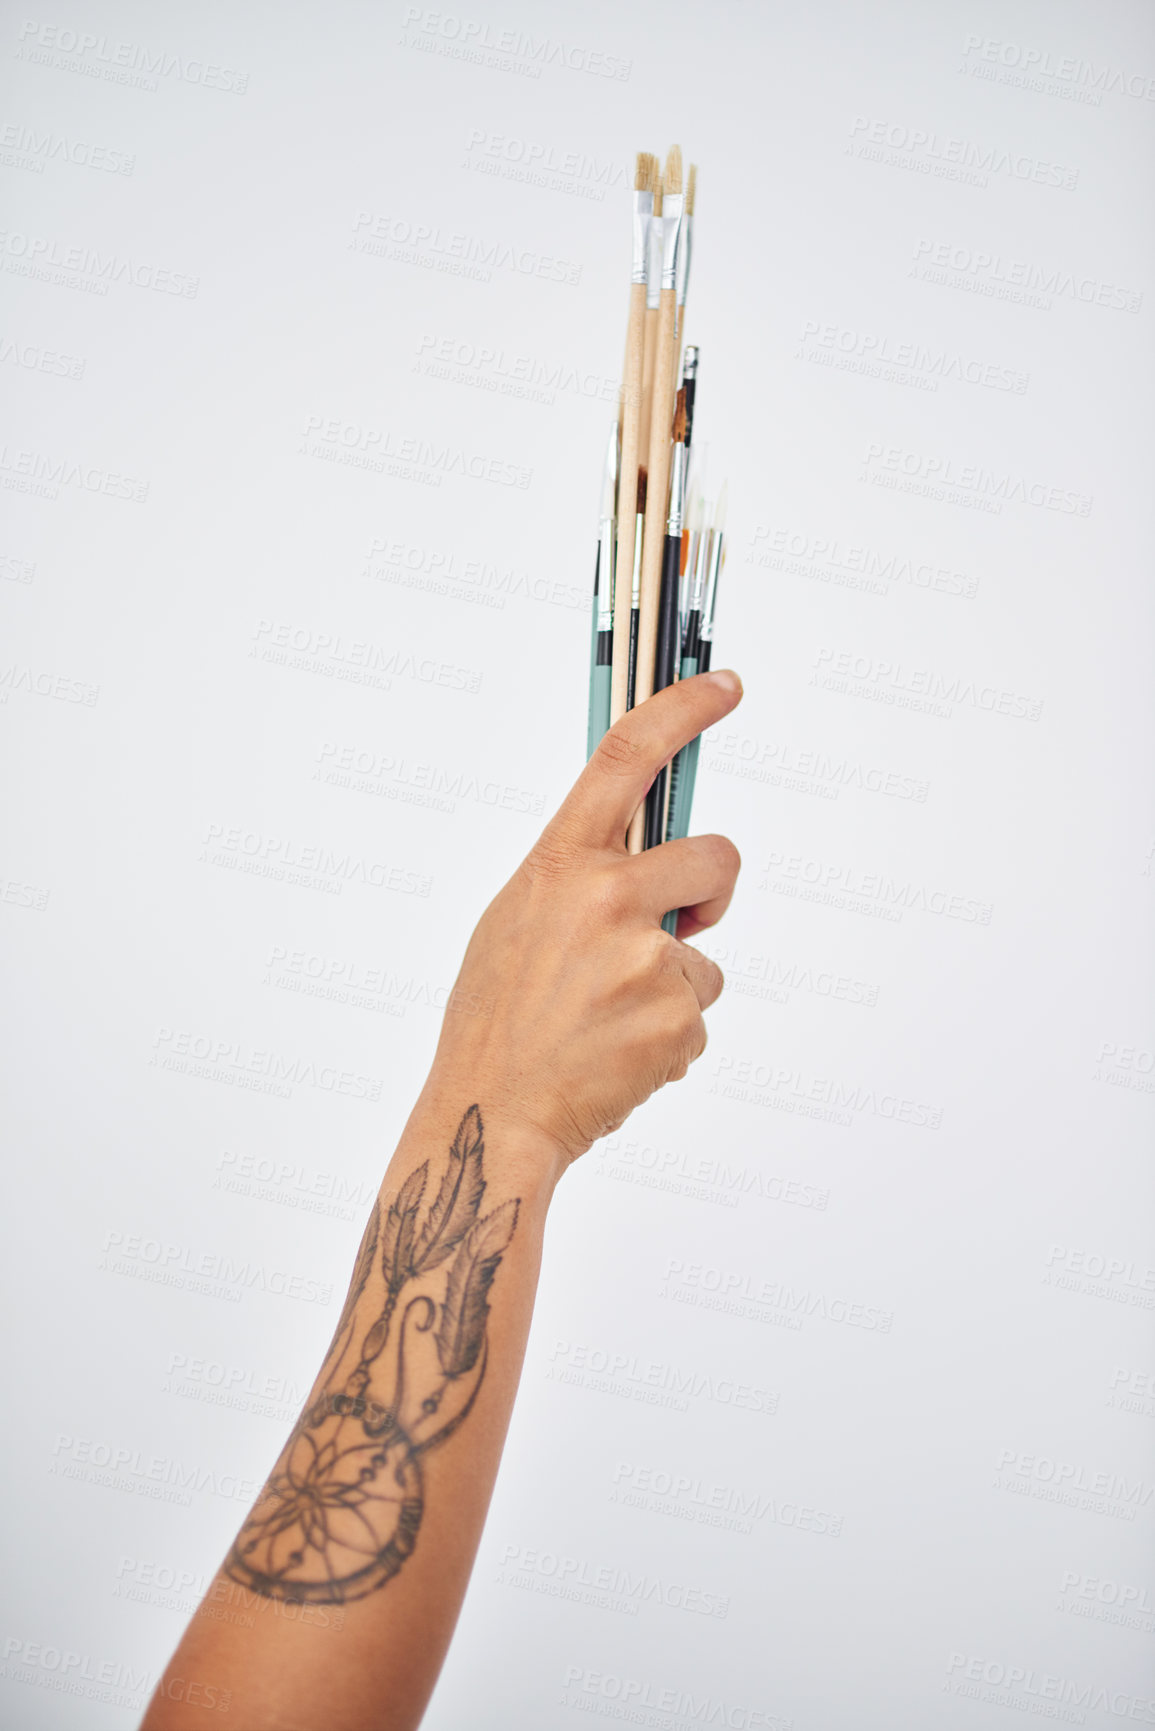 Buy stock photo Cropped shot of an unrecognizable woman holding paintbrushes against a white background